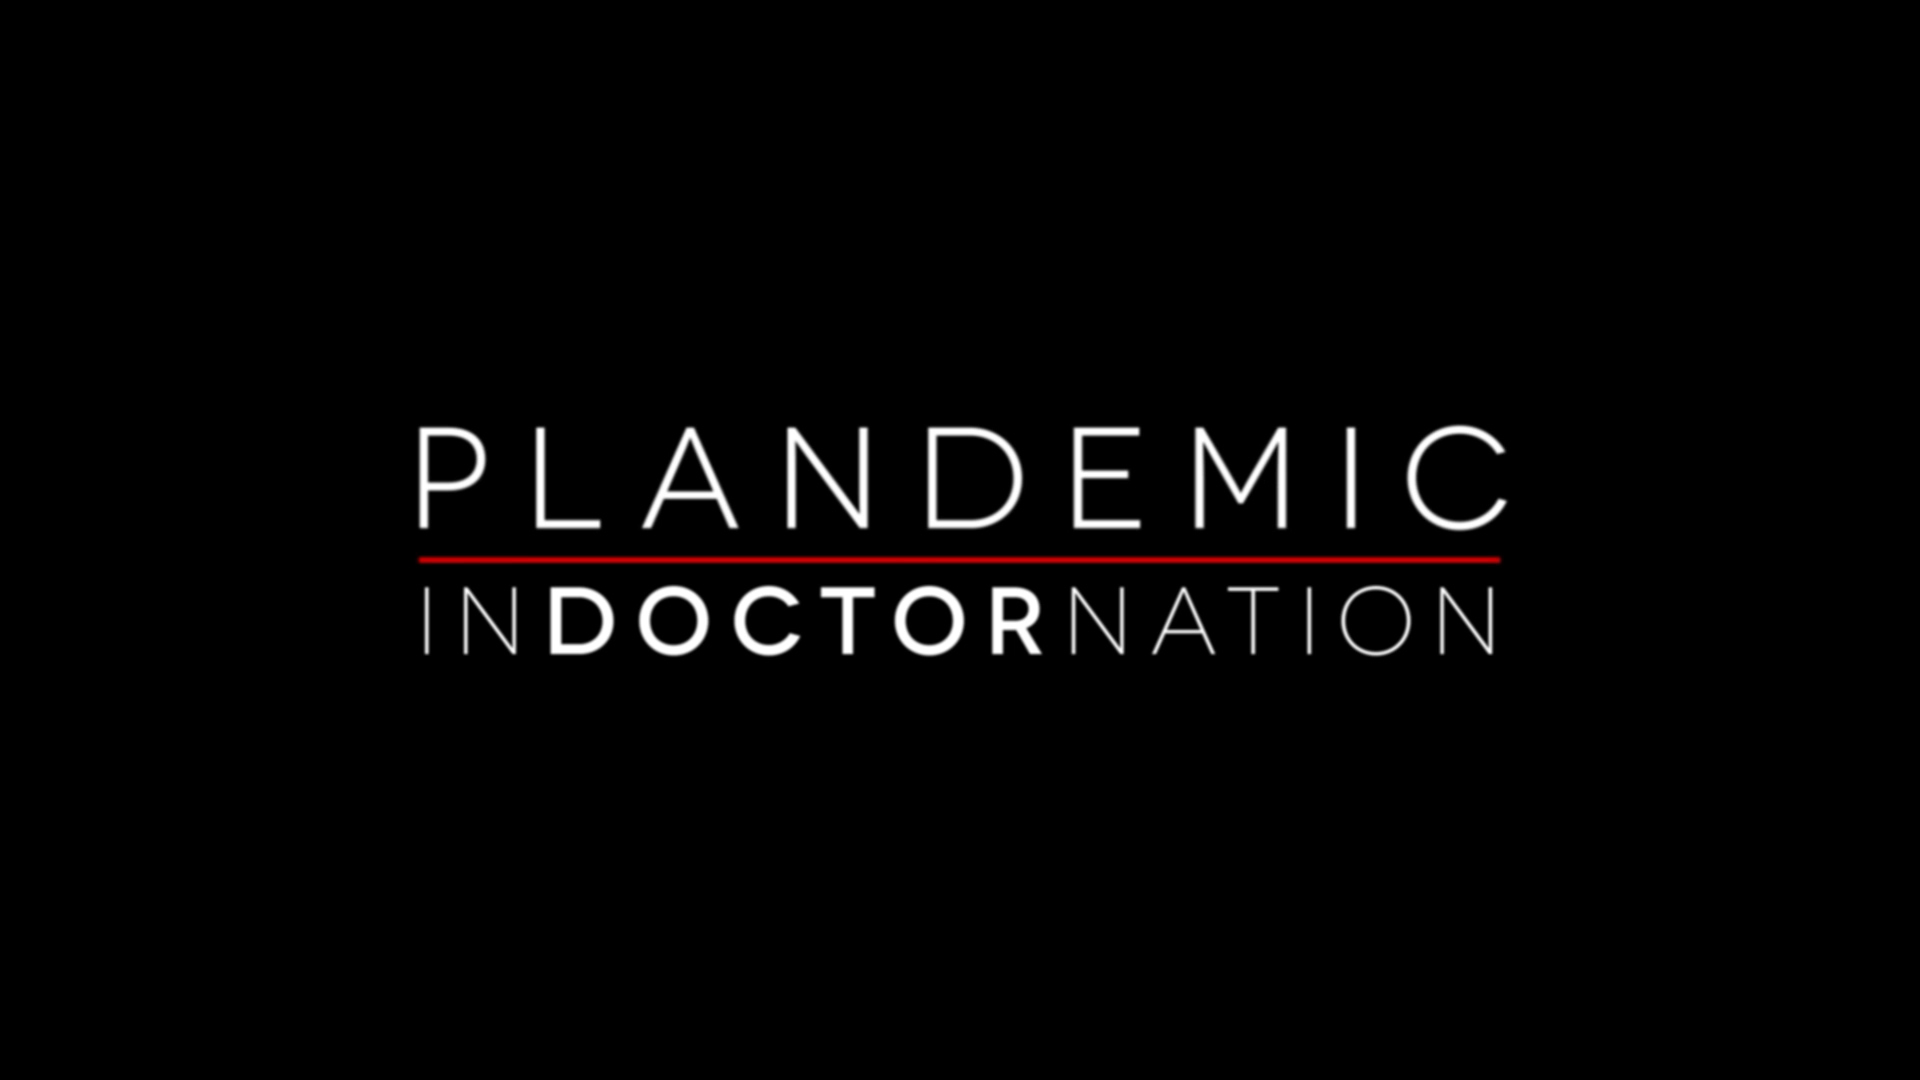 Plandemic II: inDOCTORnation film released – here are the most damning outtakes that expose the criminal fraud of Fauci, the WHO and the CDC – NaturalNews.com